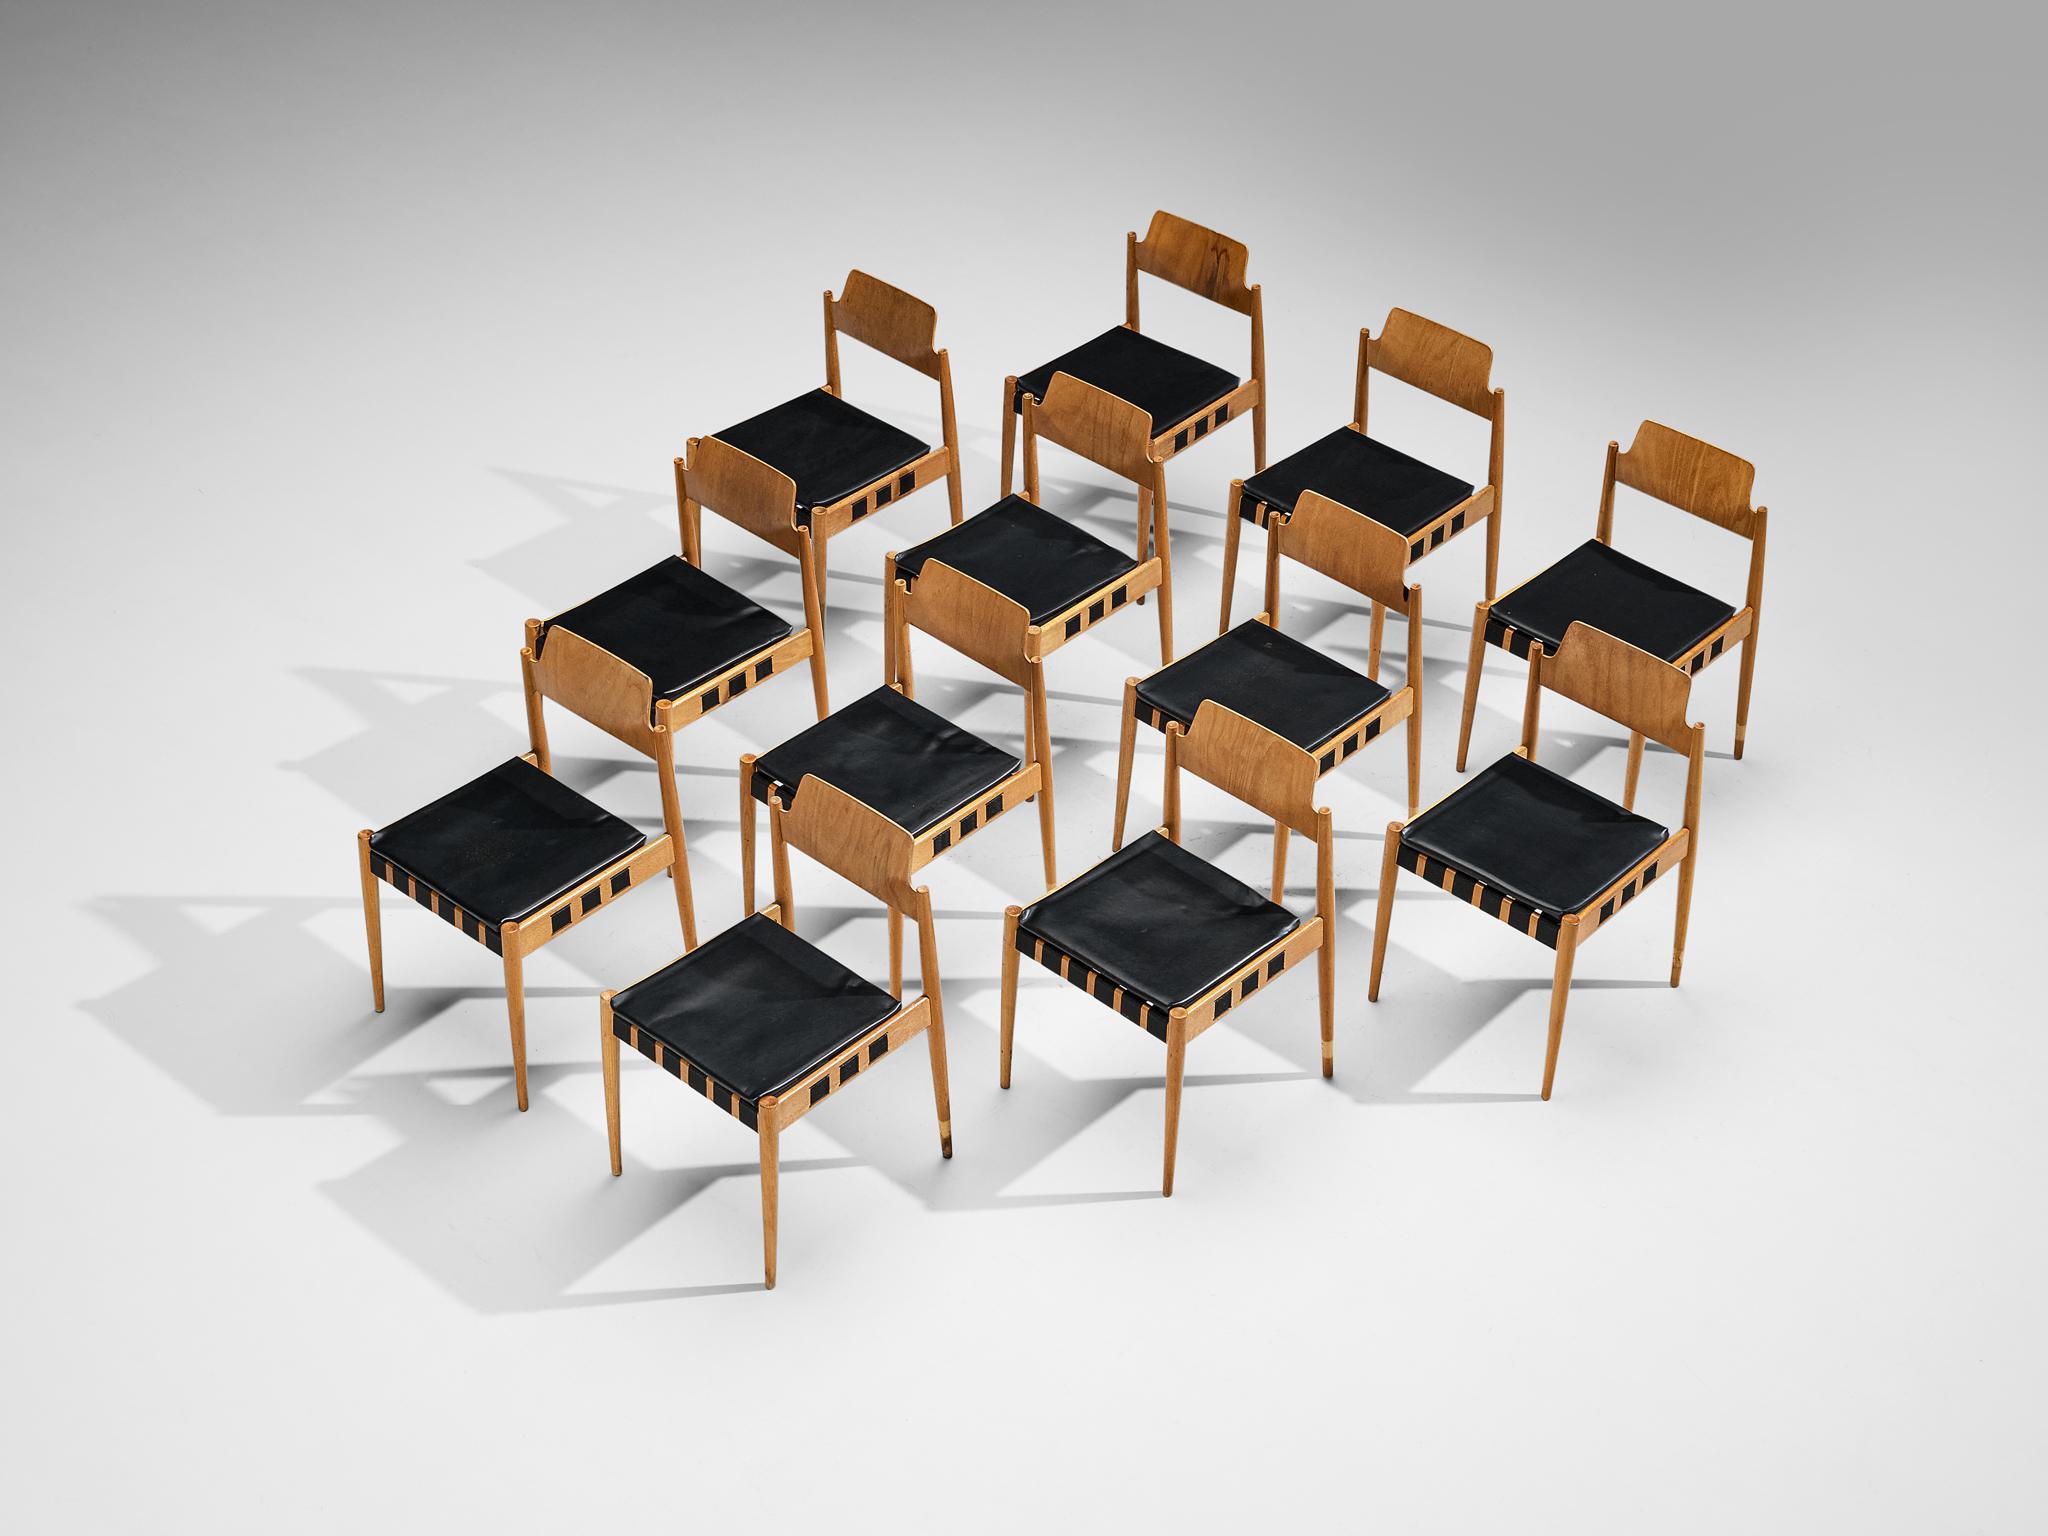 Egon Eiermann for Wilde and Spieth, dining chairs, beech, leather, leatherette, Germany, 1960s

Famous postwar German architect Egon Eiermann designed these chairs for German manufacturer Wilde + Spieth in the early 1960s. These chairs remind of